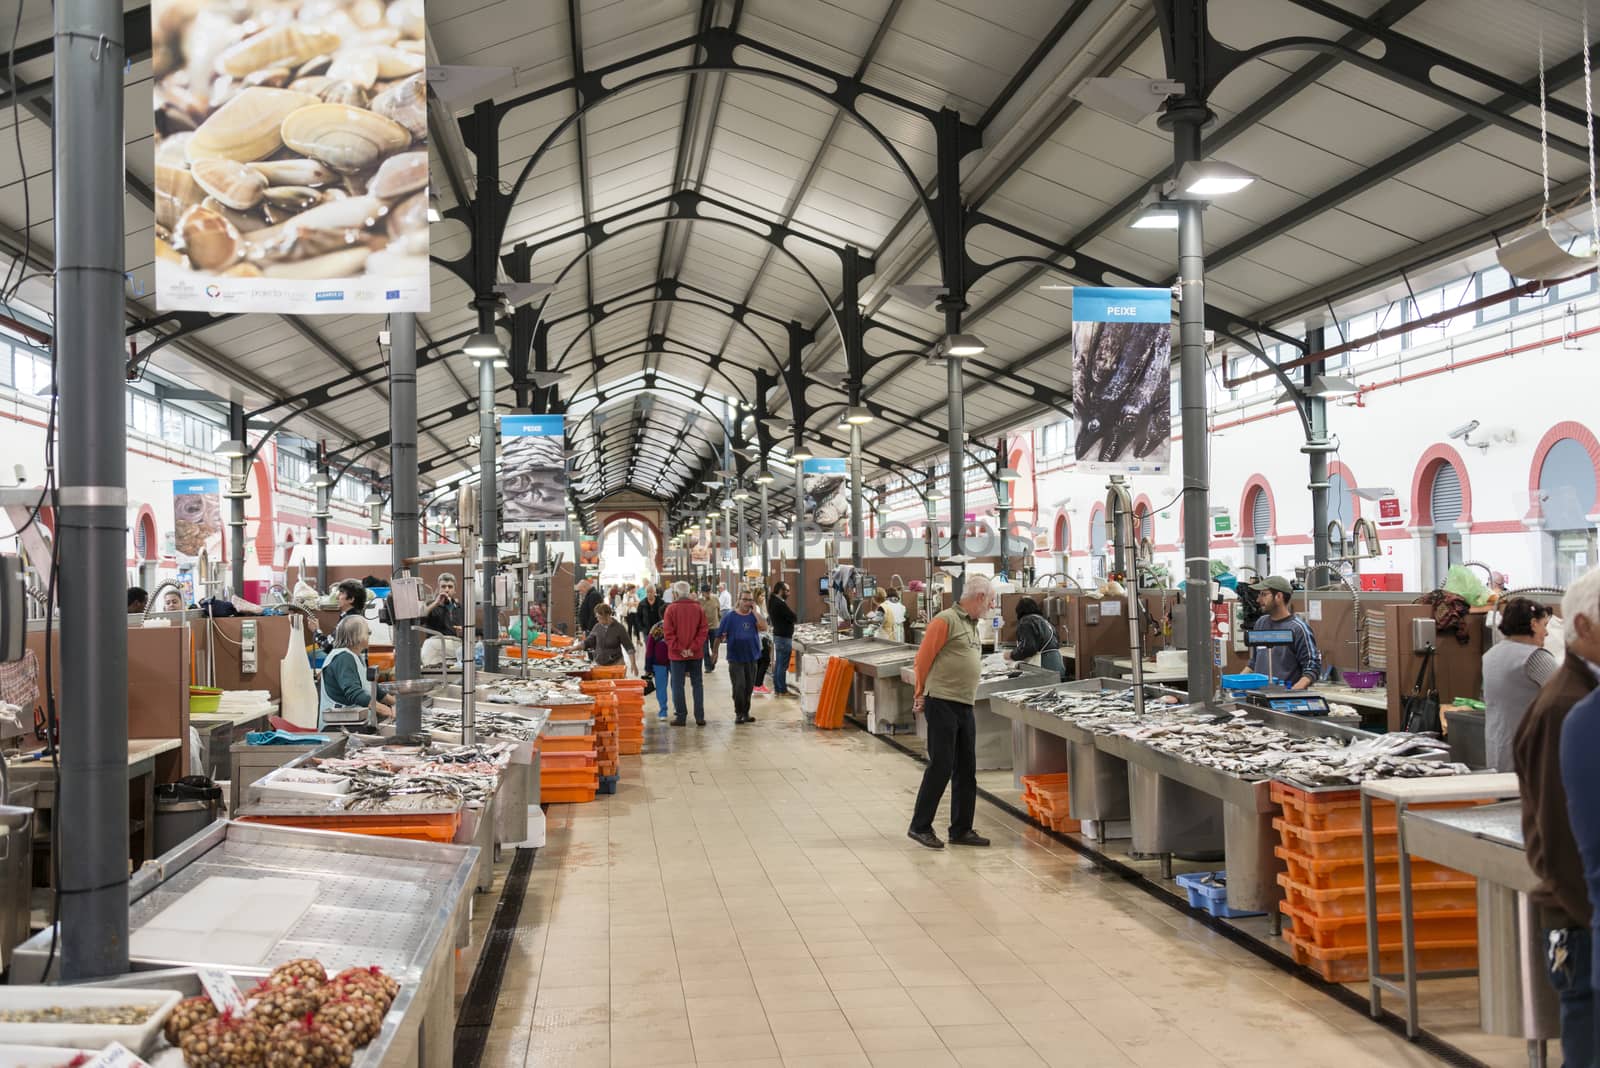 Market hall in Loule by compuinfoto